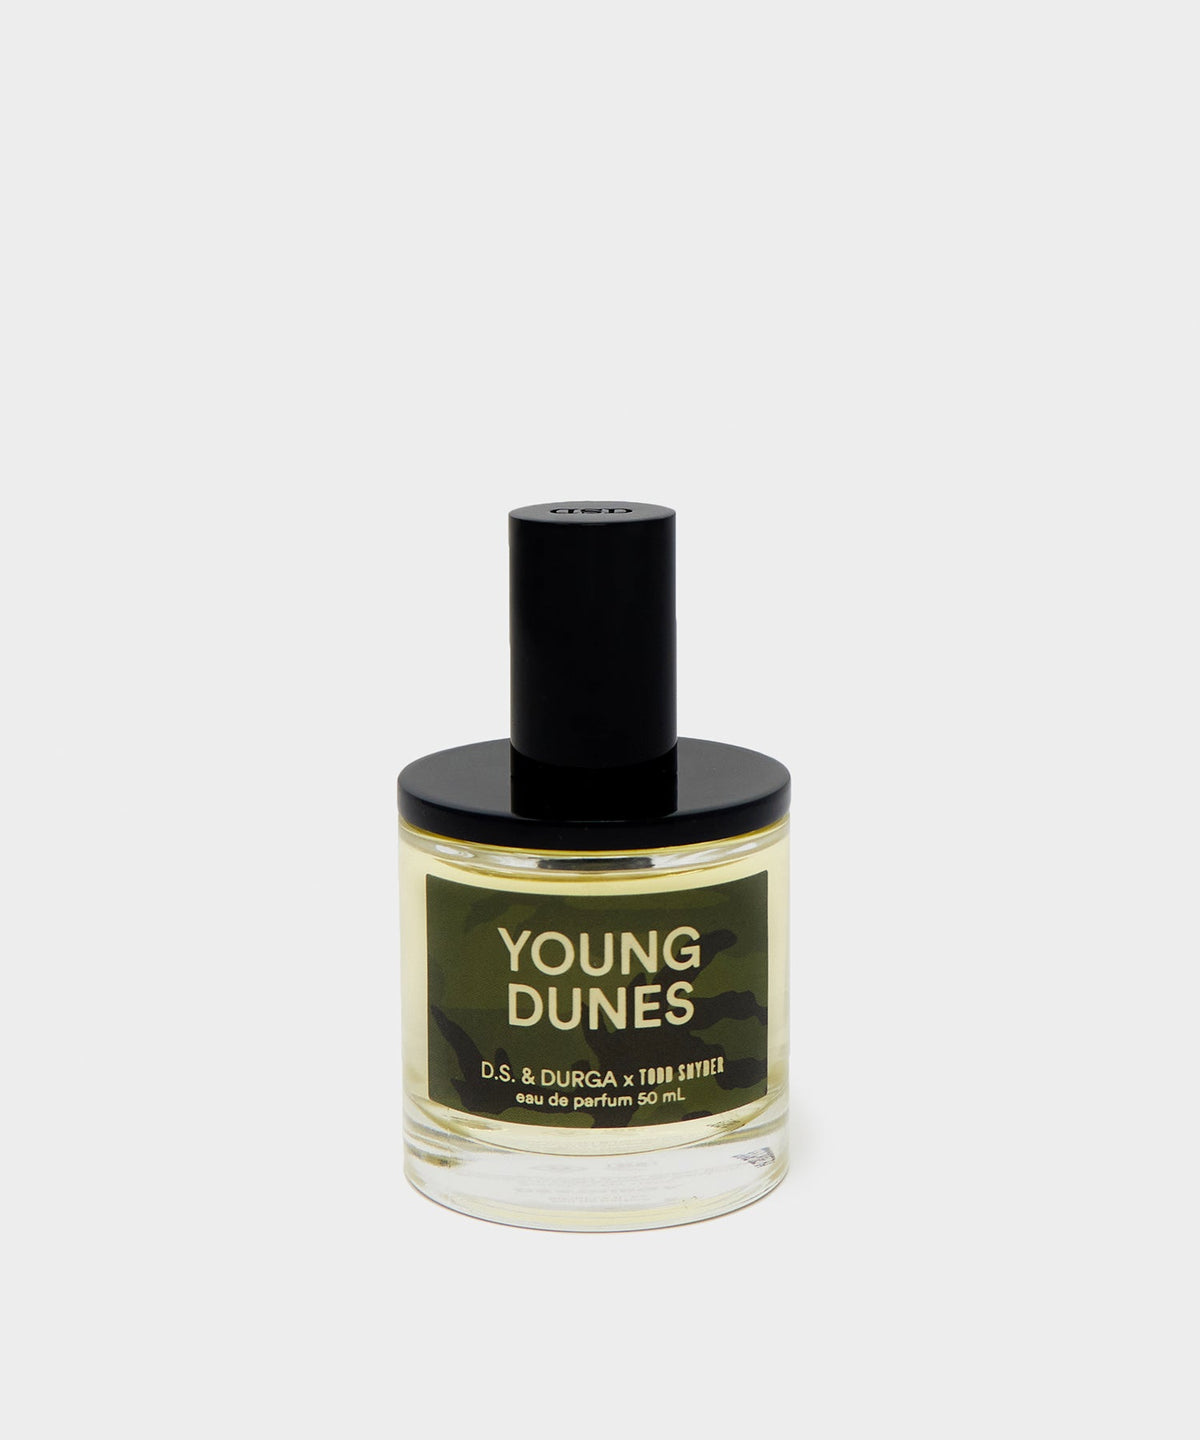 Todd Snyder x D.S. & Durga Young Dunes 50ml